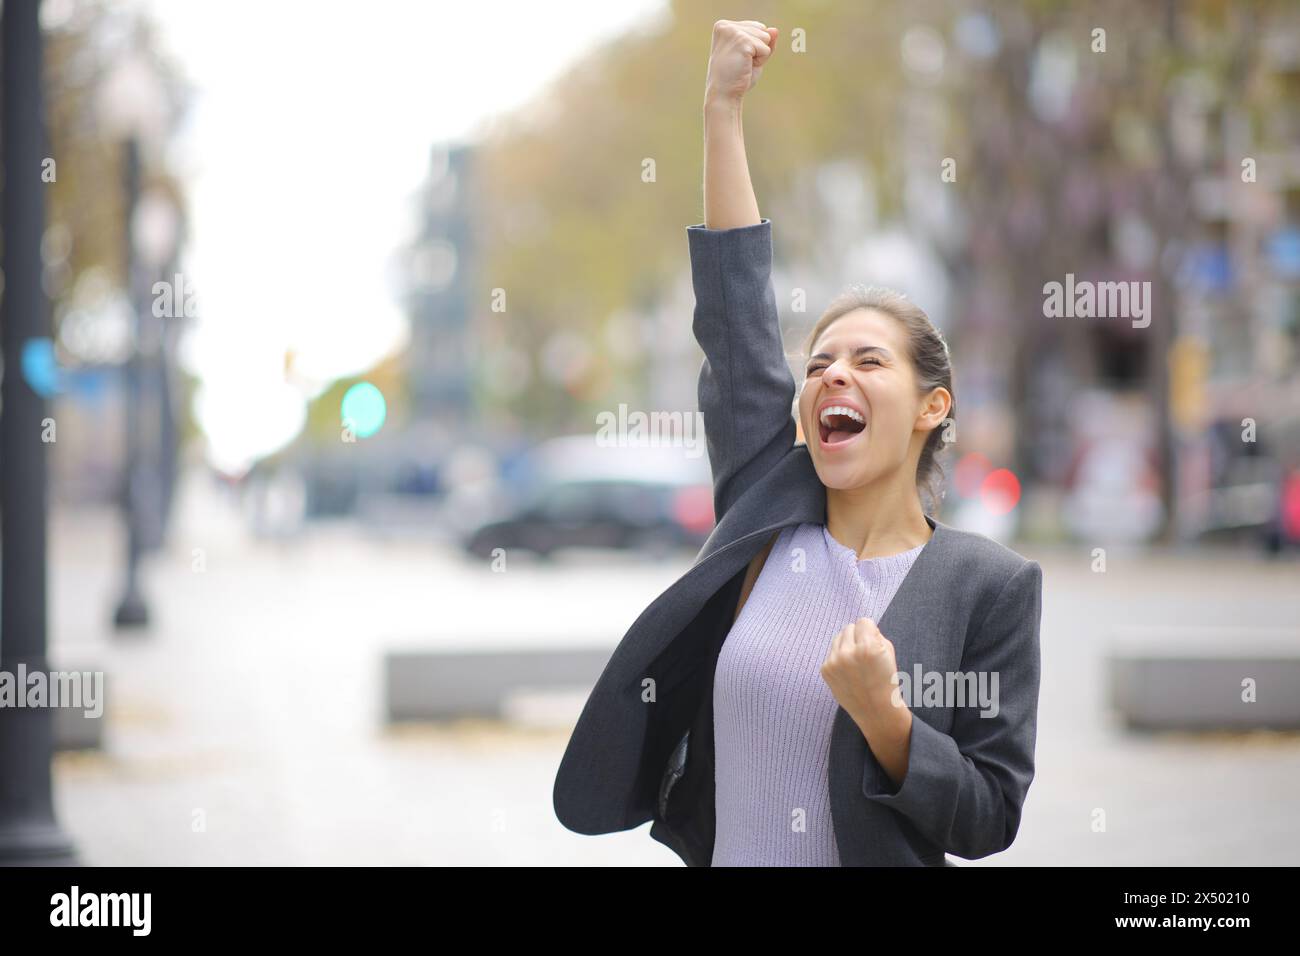 Excited businesswoman celebrating in the street raising arm and screaming Stock Photo